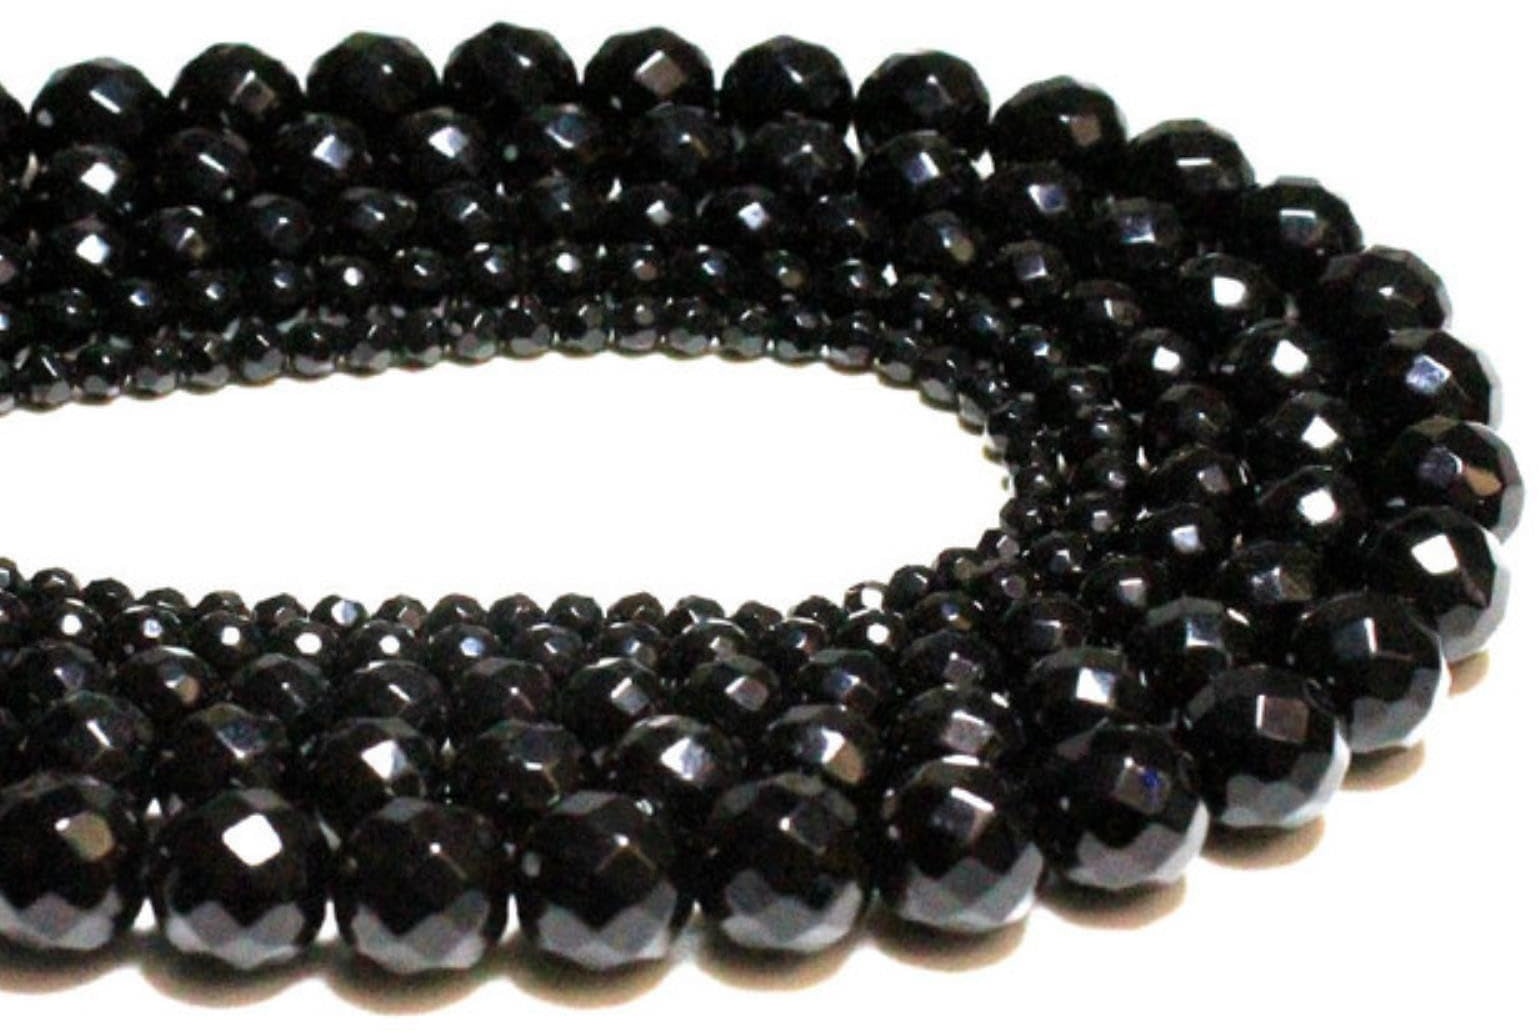 CaDoes 4/6/8/10/12/14 mm Black Onyx Round Natural Stone Beads Strand for Jewelry Making DIY Bracelet Necklace-Faceted Black Onyx,4 mm About 90 pcs